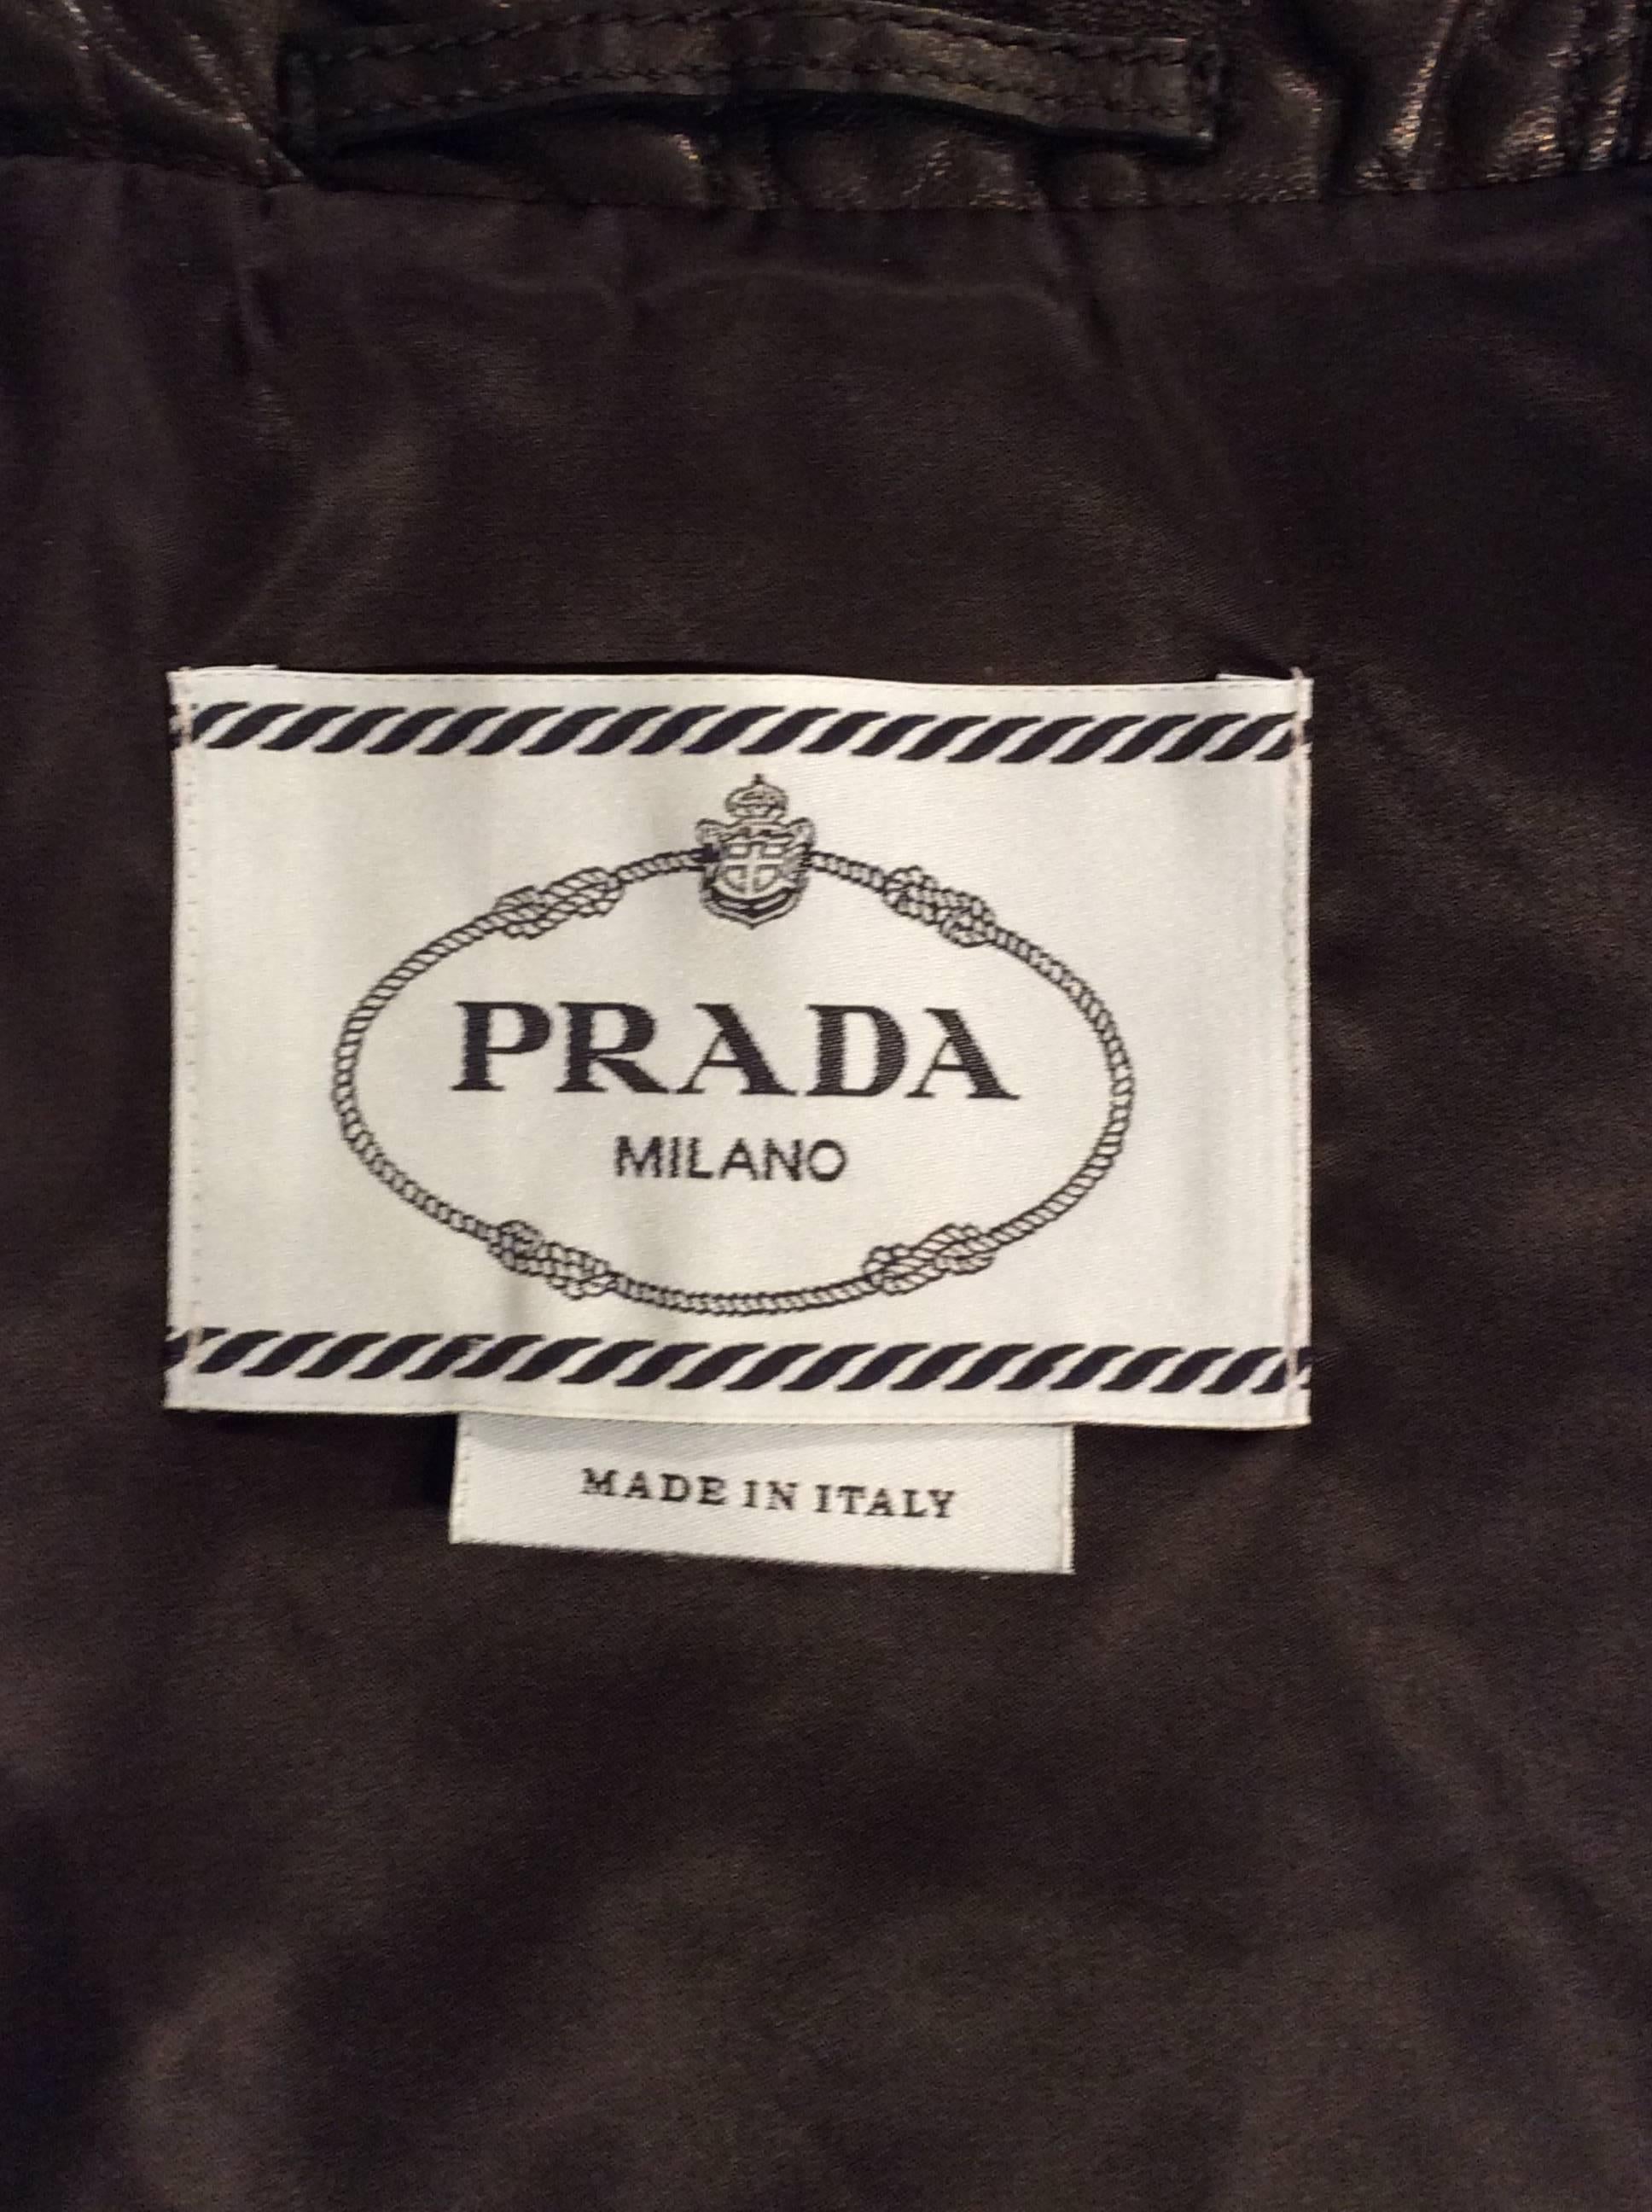 Prada Black With Quilted Pattern Leather Jacket Sz 38 (Us 2) For Sale 3